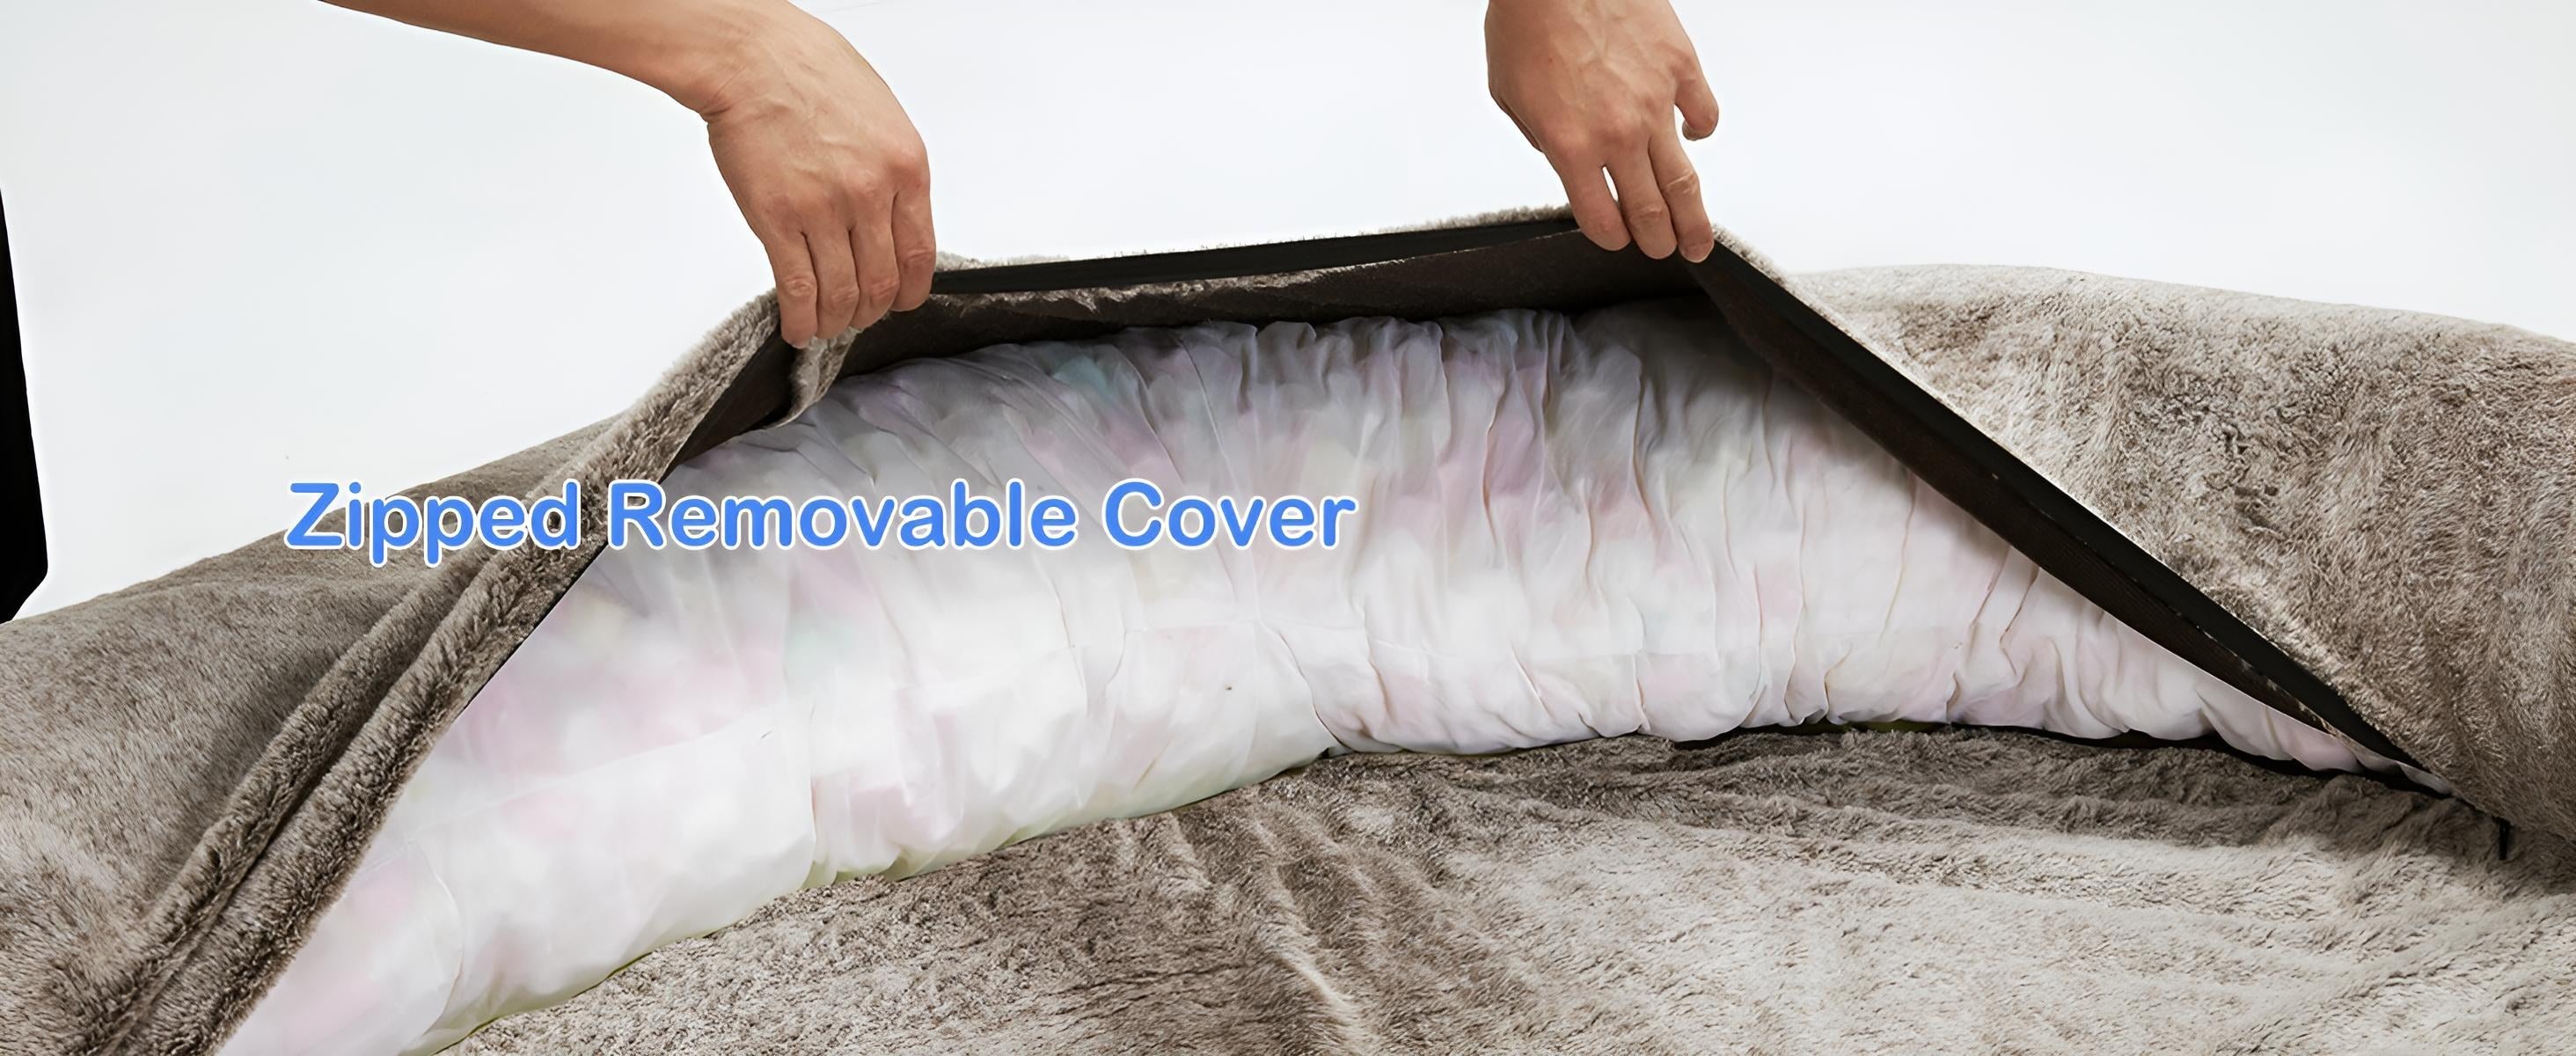 The zipped removable cover of the human dog beds